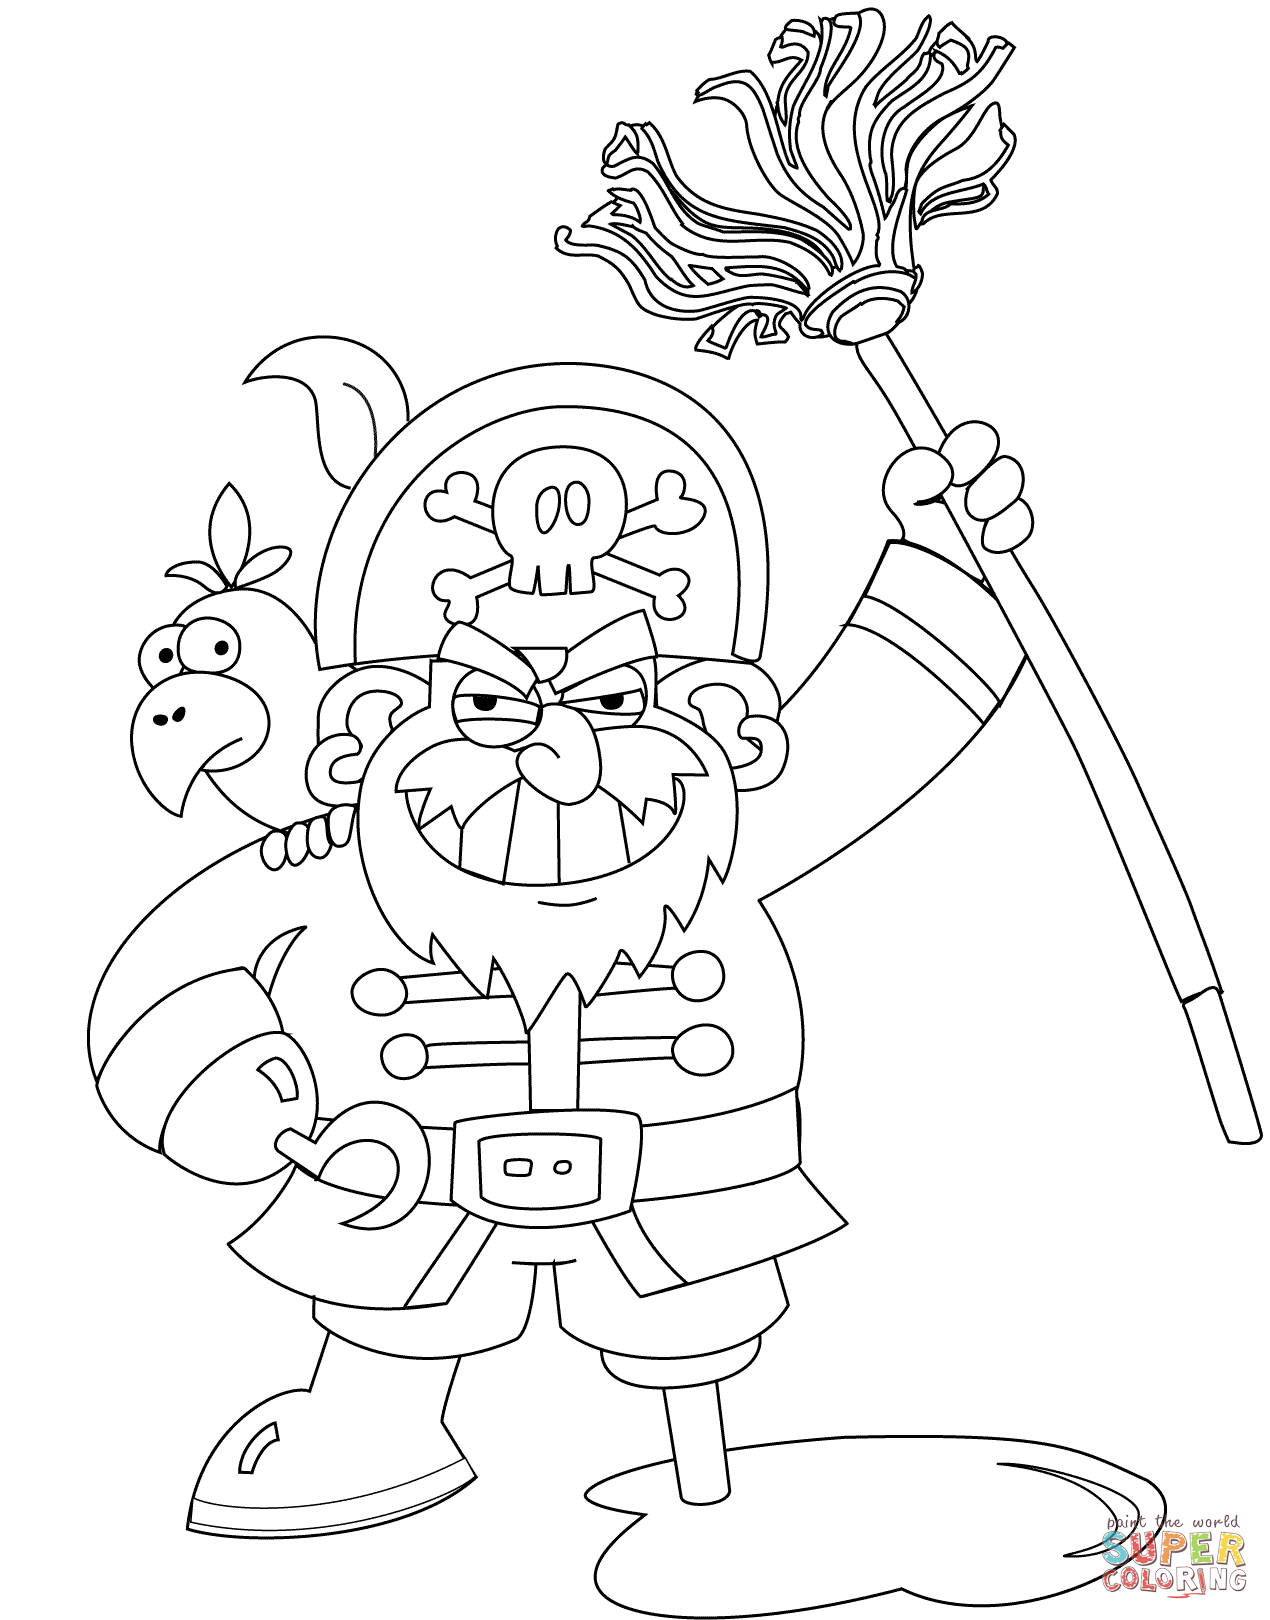 Pirate with Mop coloring page | Free Printable Coloring Pages